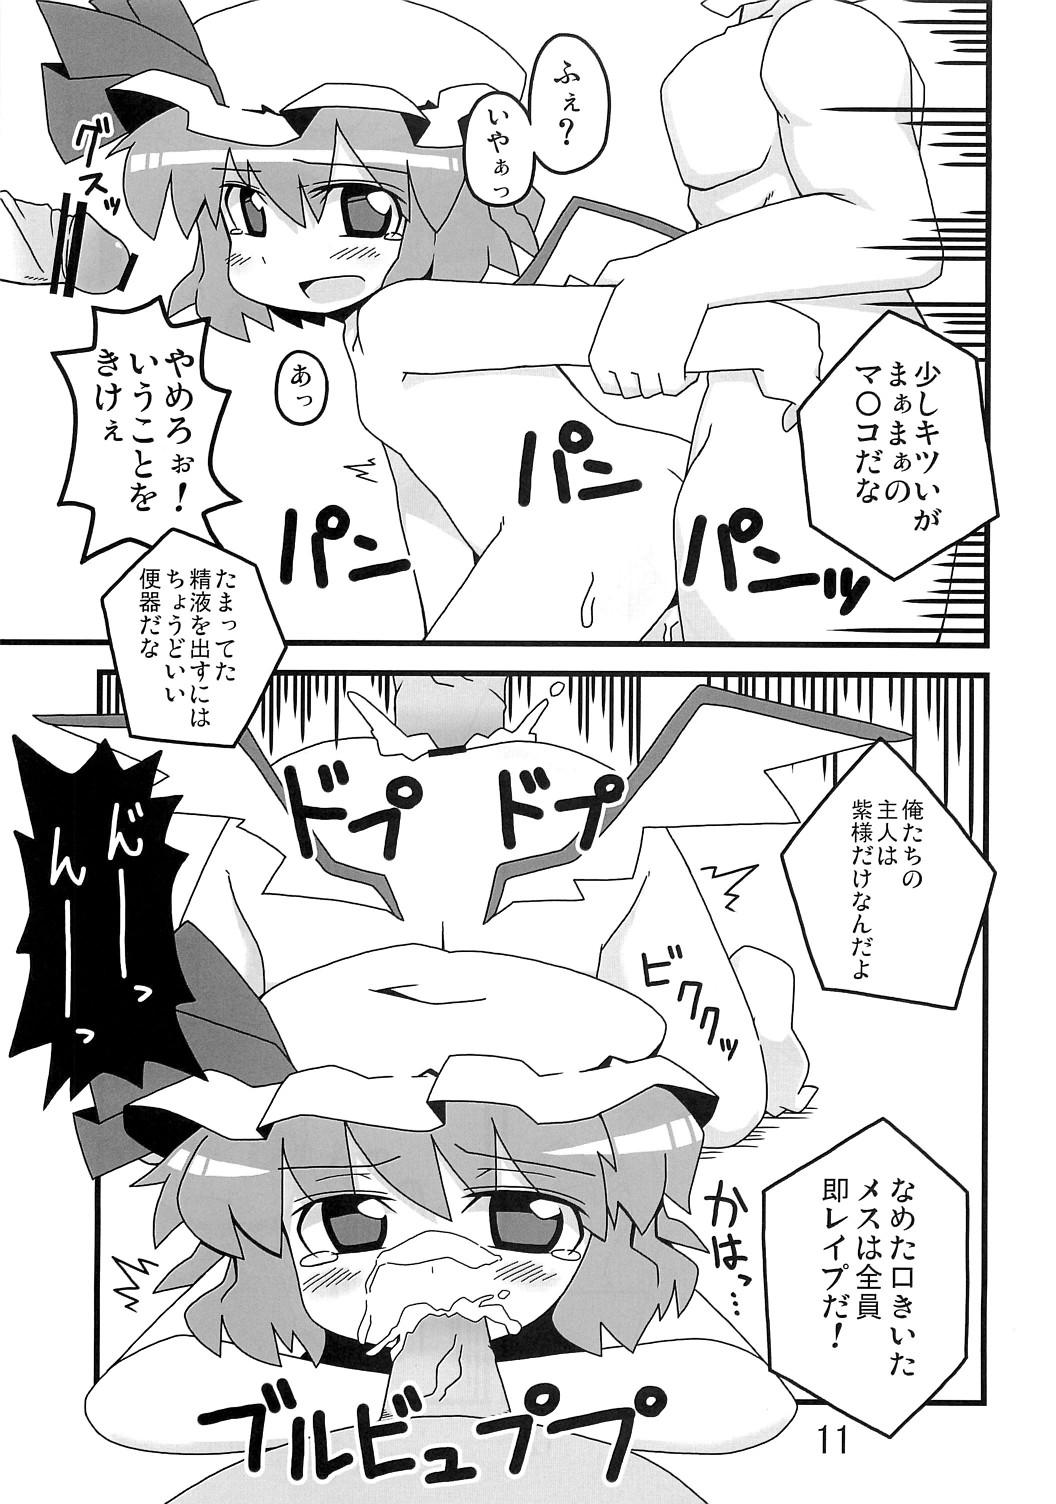 Russia 東方豊年祭 - Touhou project Shemale Sex - Page 10